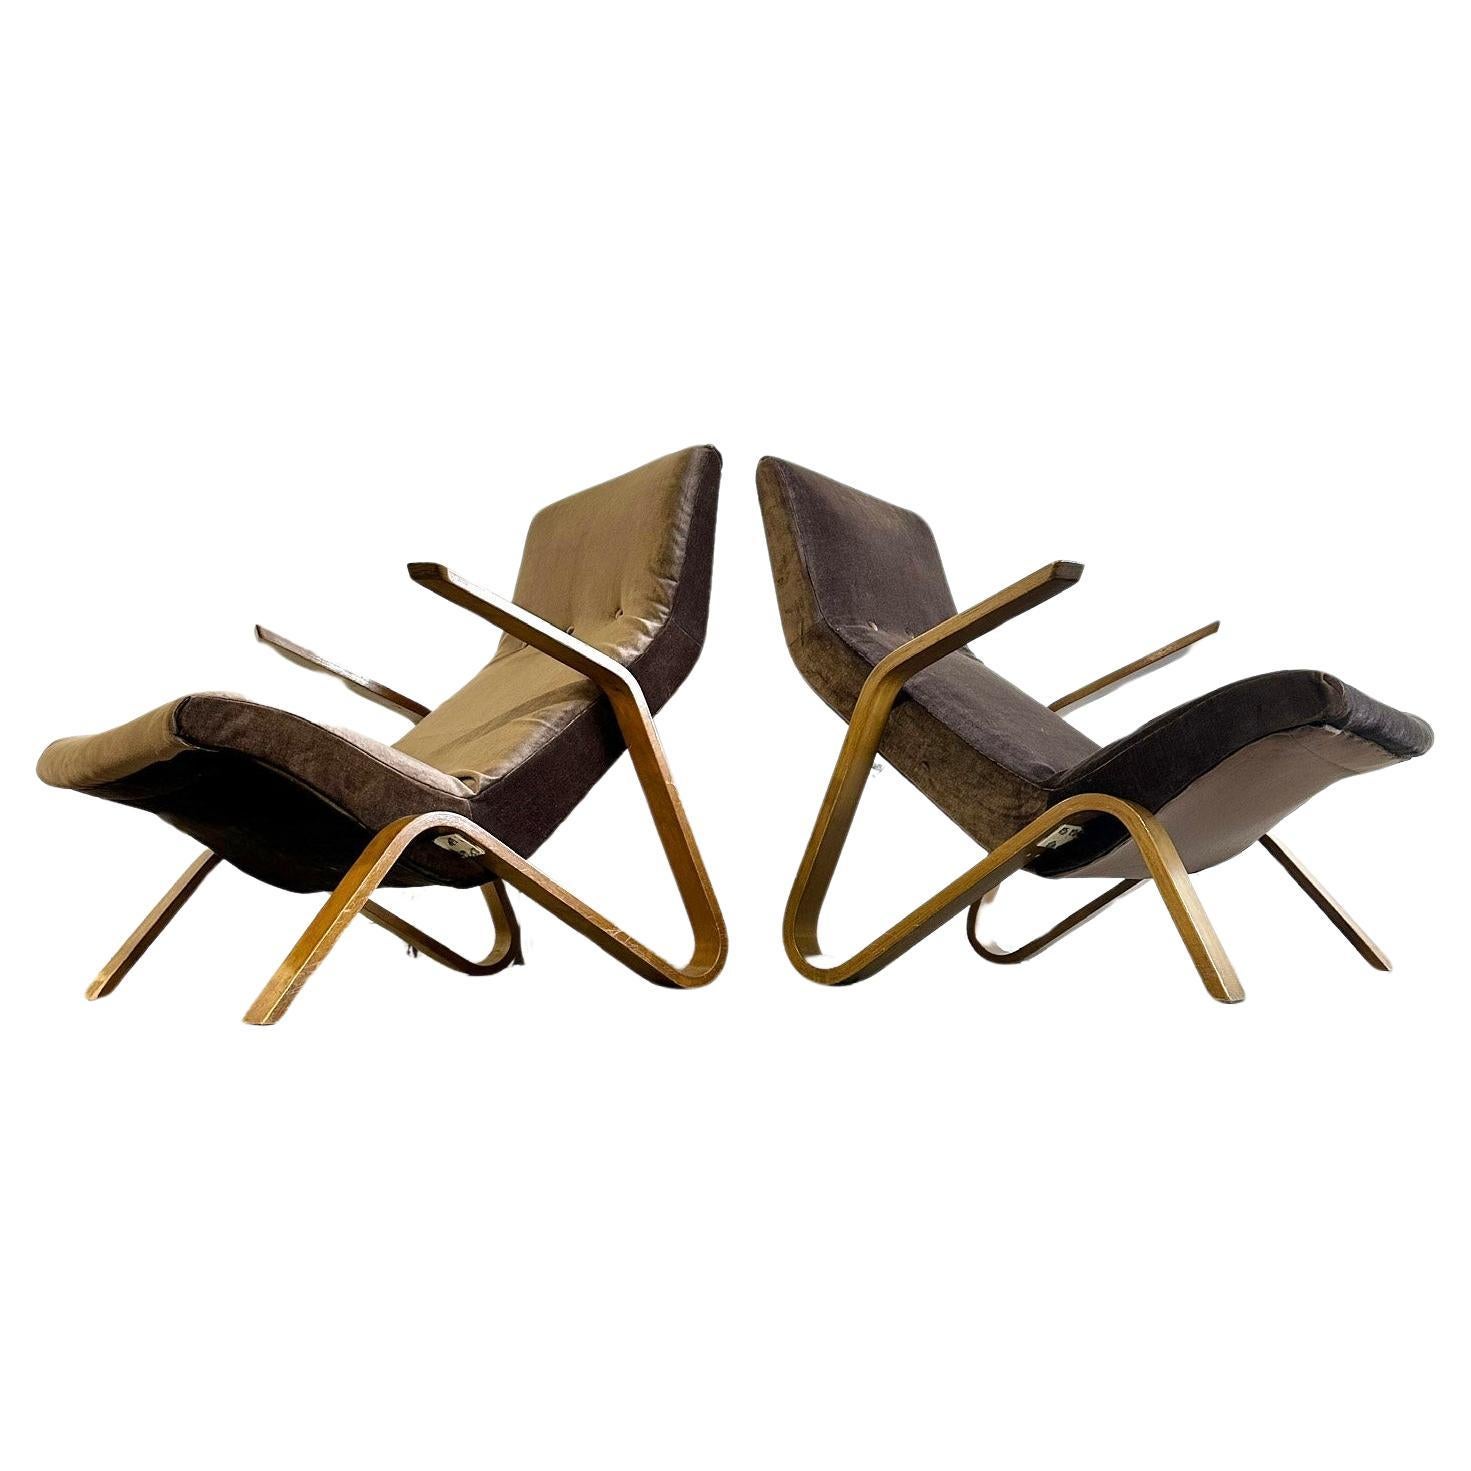 Eero Saarinen for Knoll Model 61 Grasshopper Mid Century Lounge Chairs - a Pair For Sale